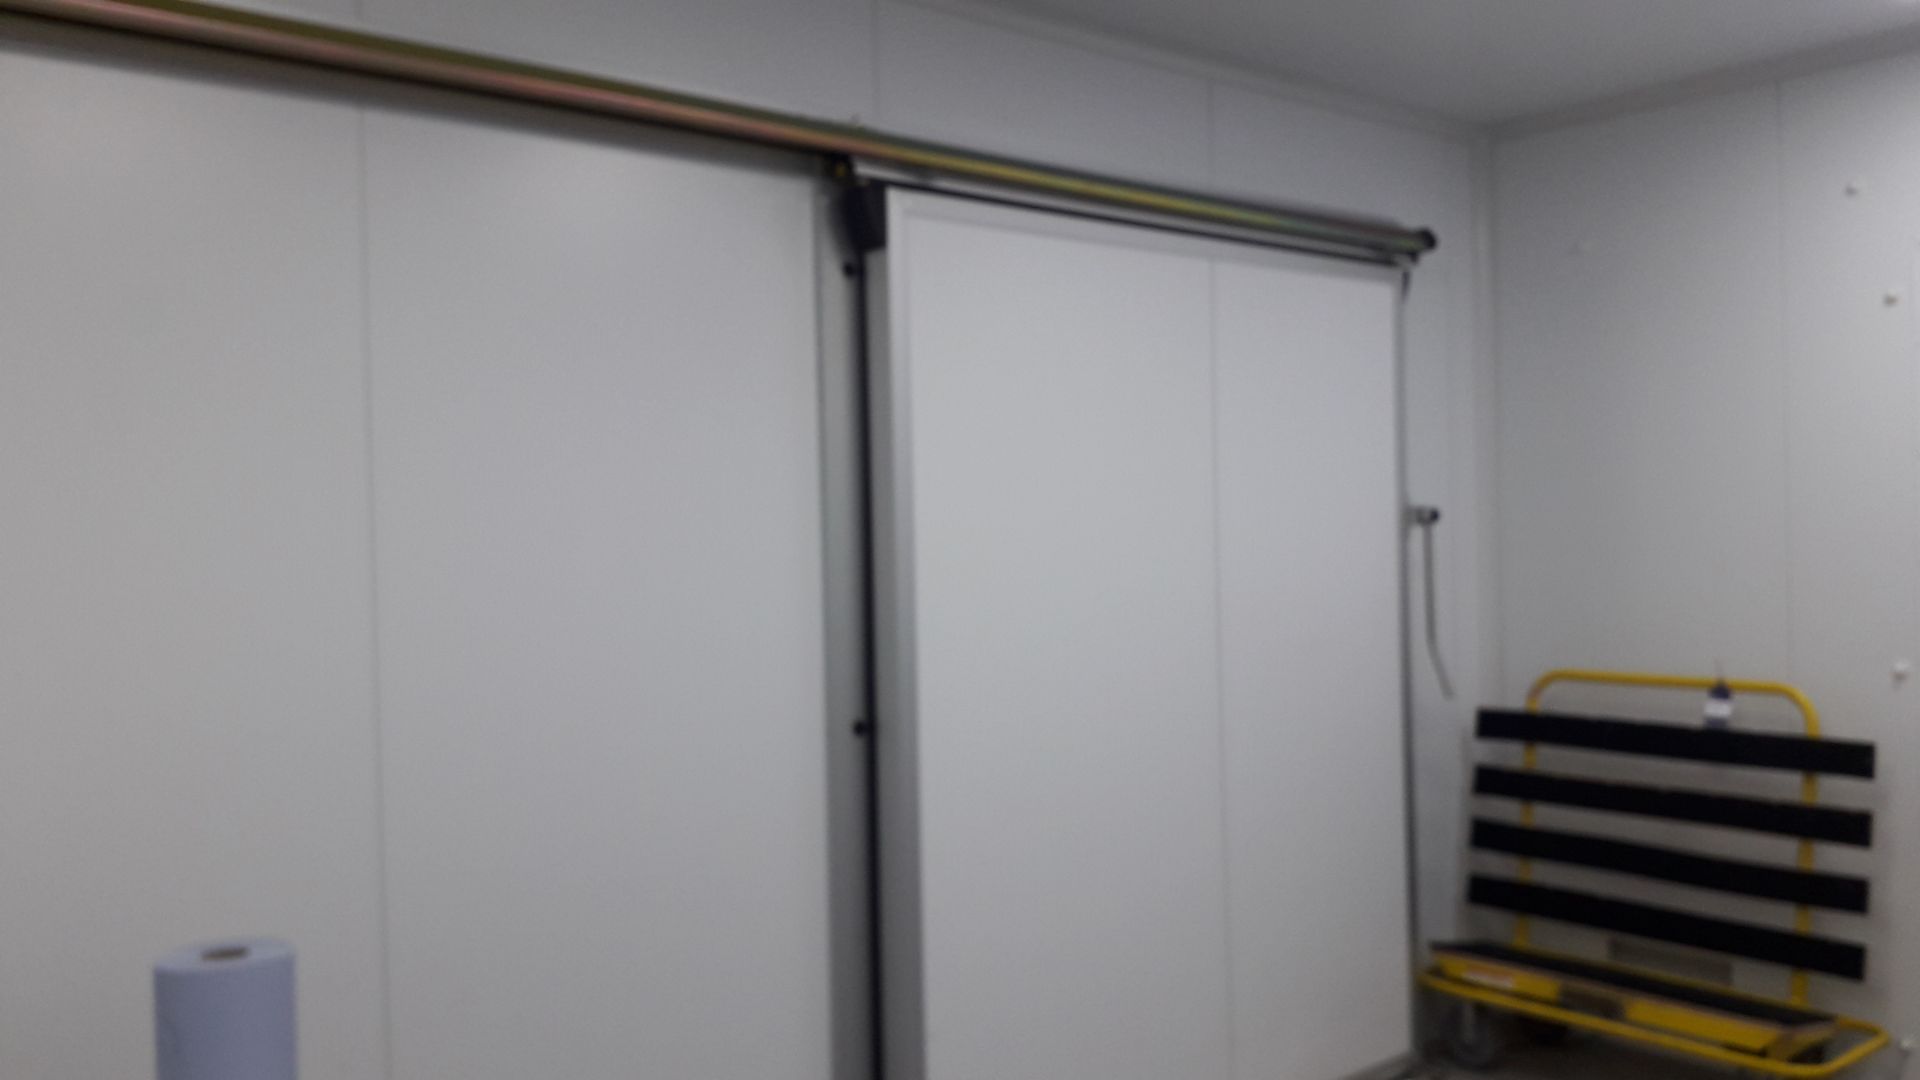 Free Standing Demountable Clean Room Installation with Air Lock 13,000 x 5,000 with Ingersoll Rand - Image 6 of 8